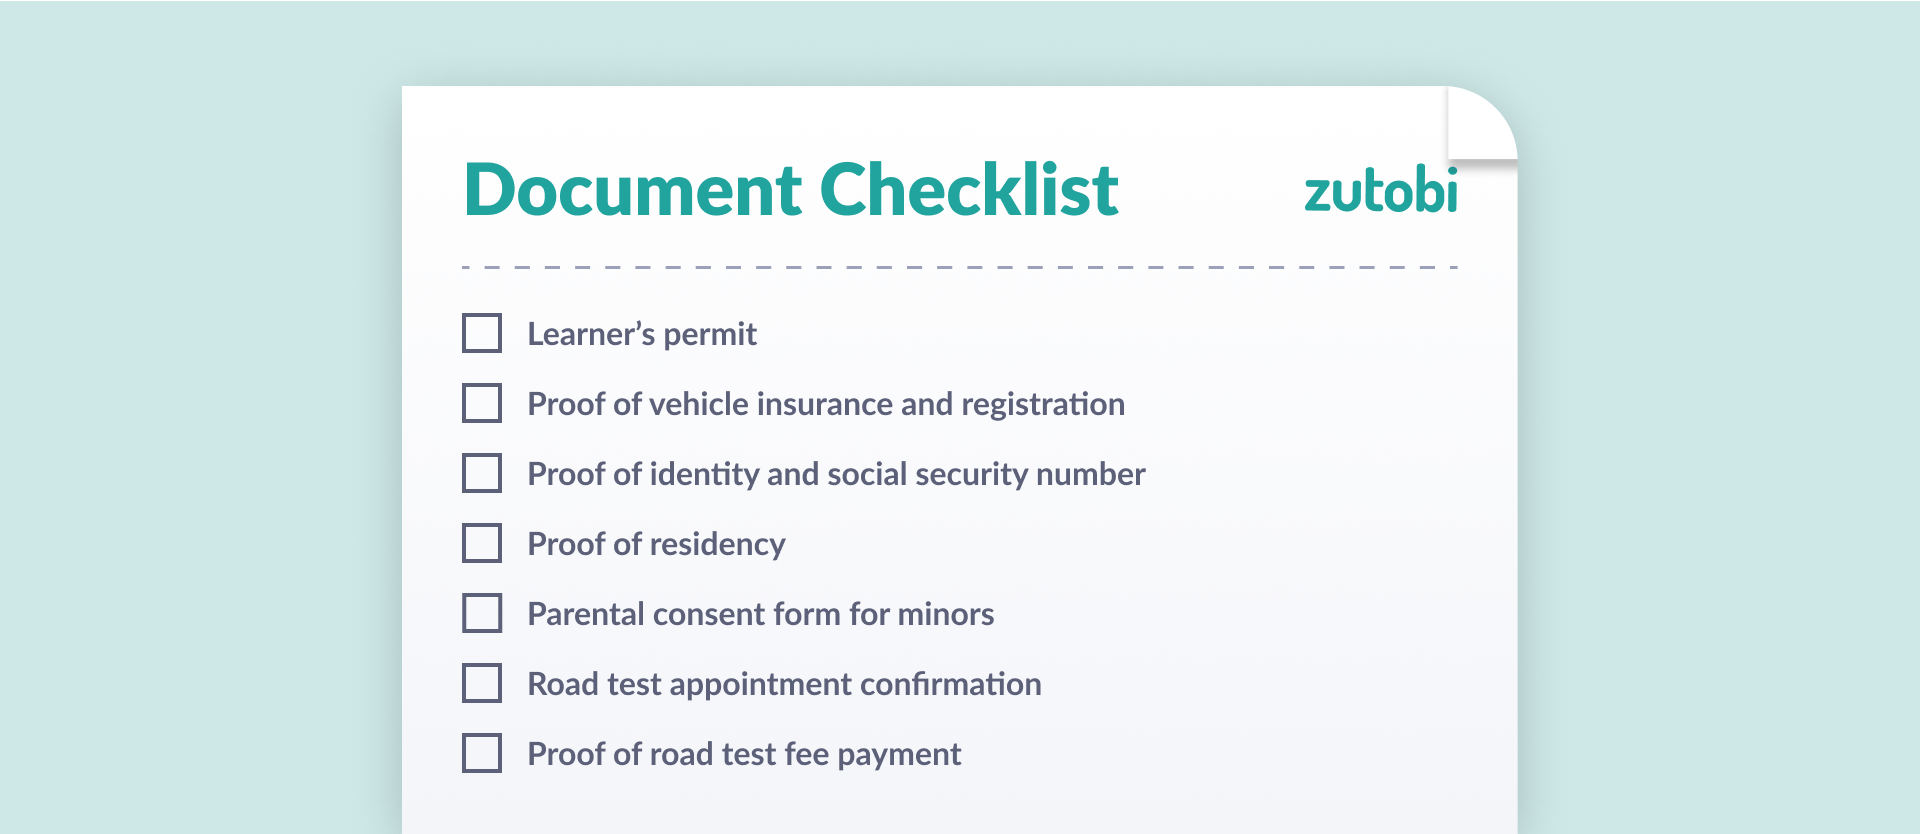 Document Checklist for the DMV road test